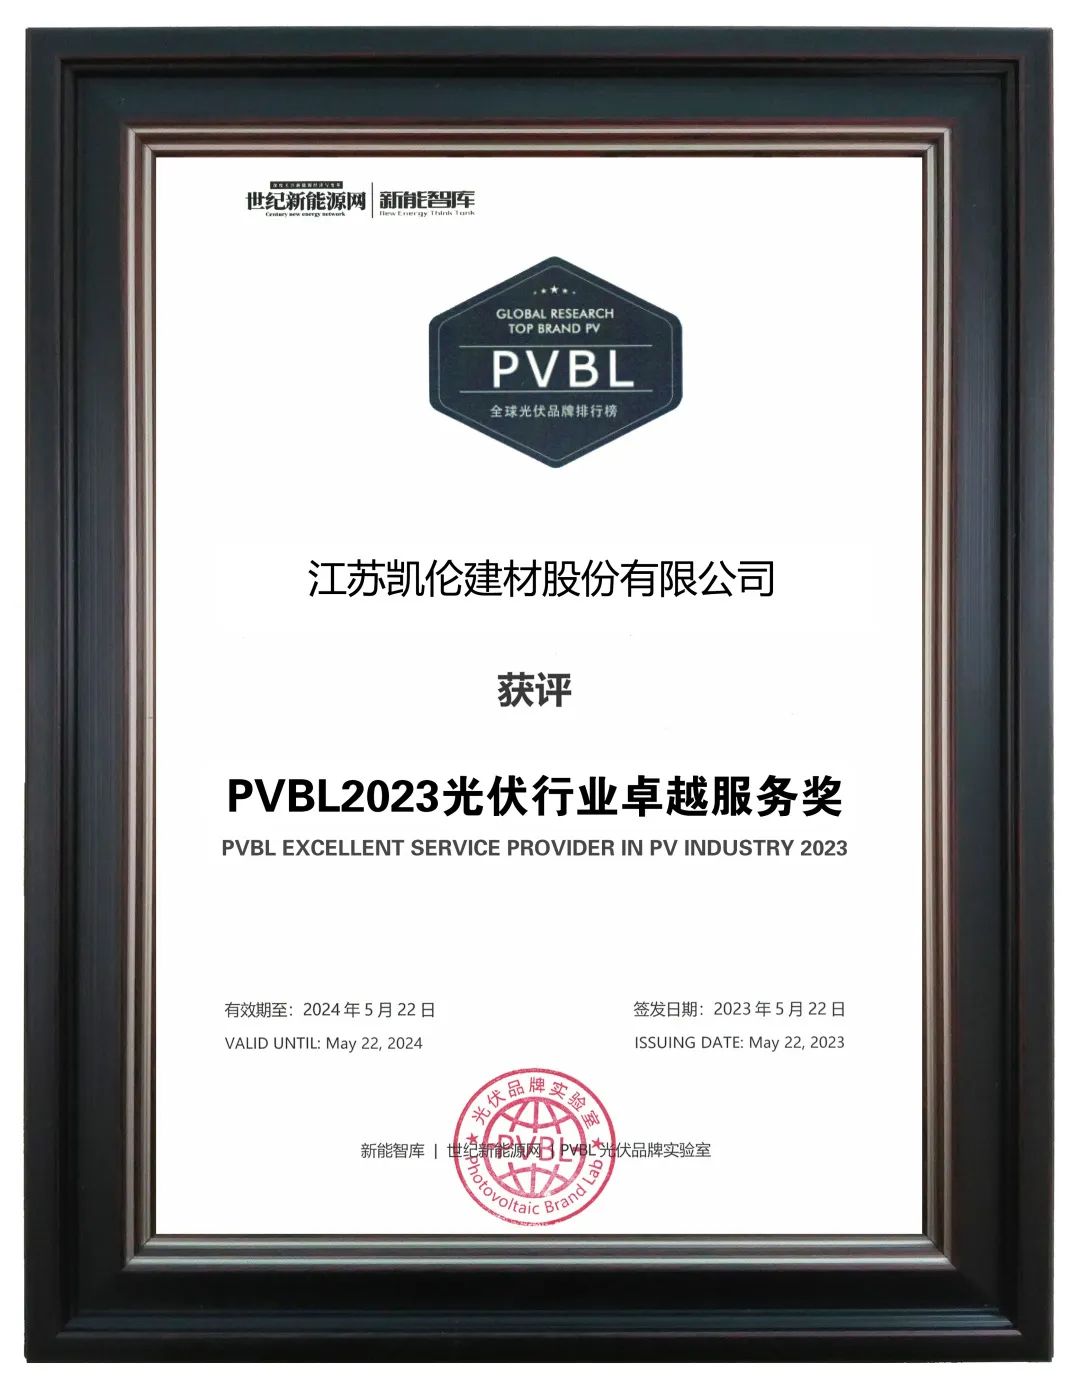 PVBL Excellent Service Provider In PV Industry 2023.